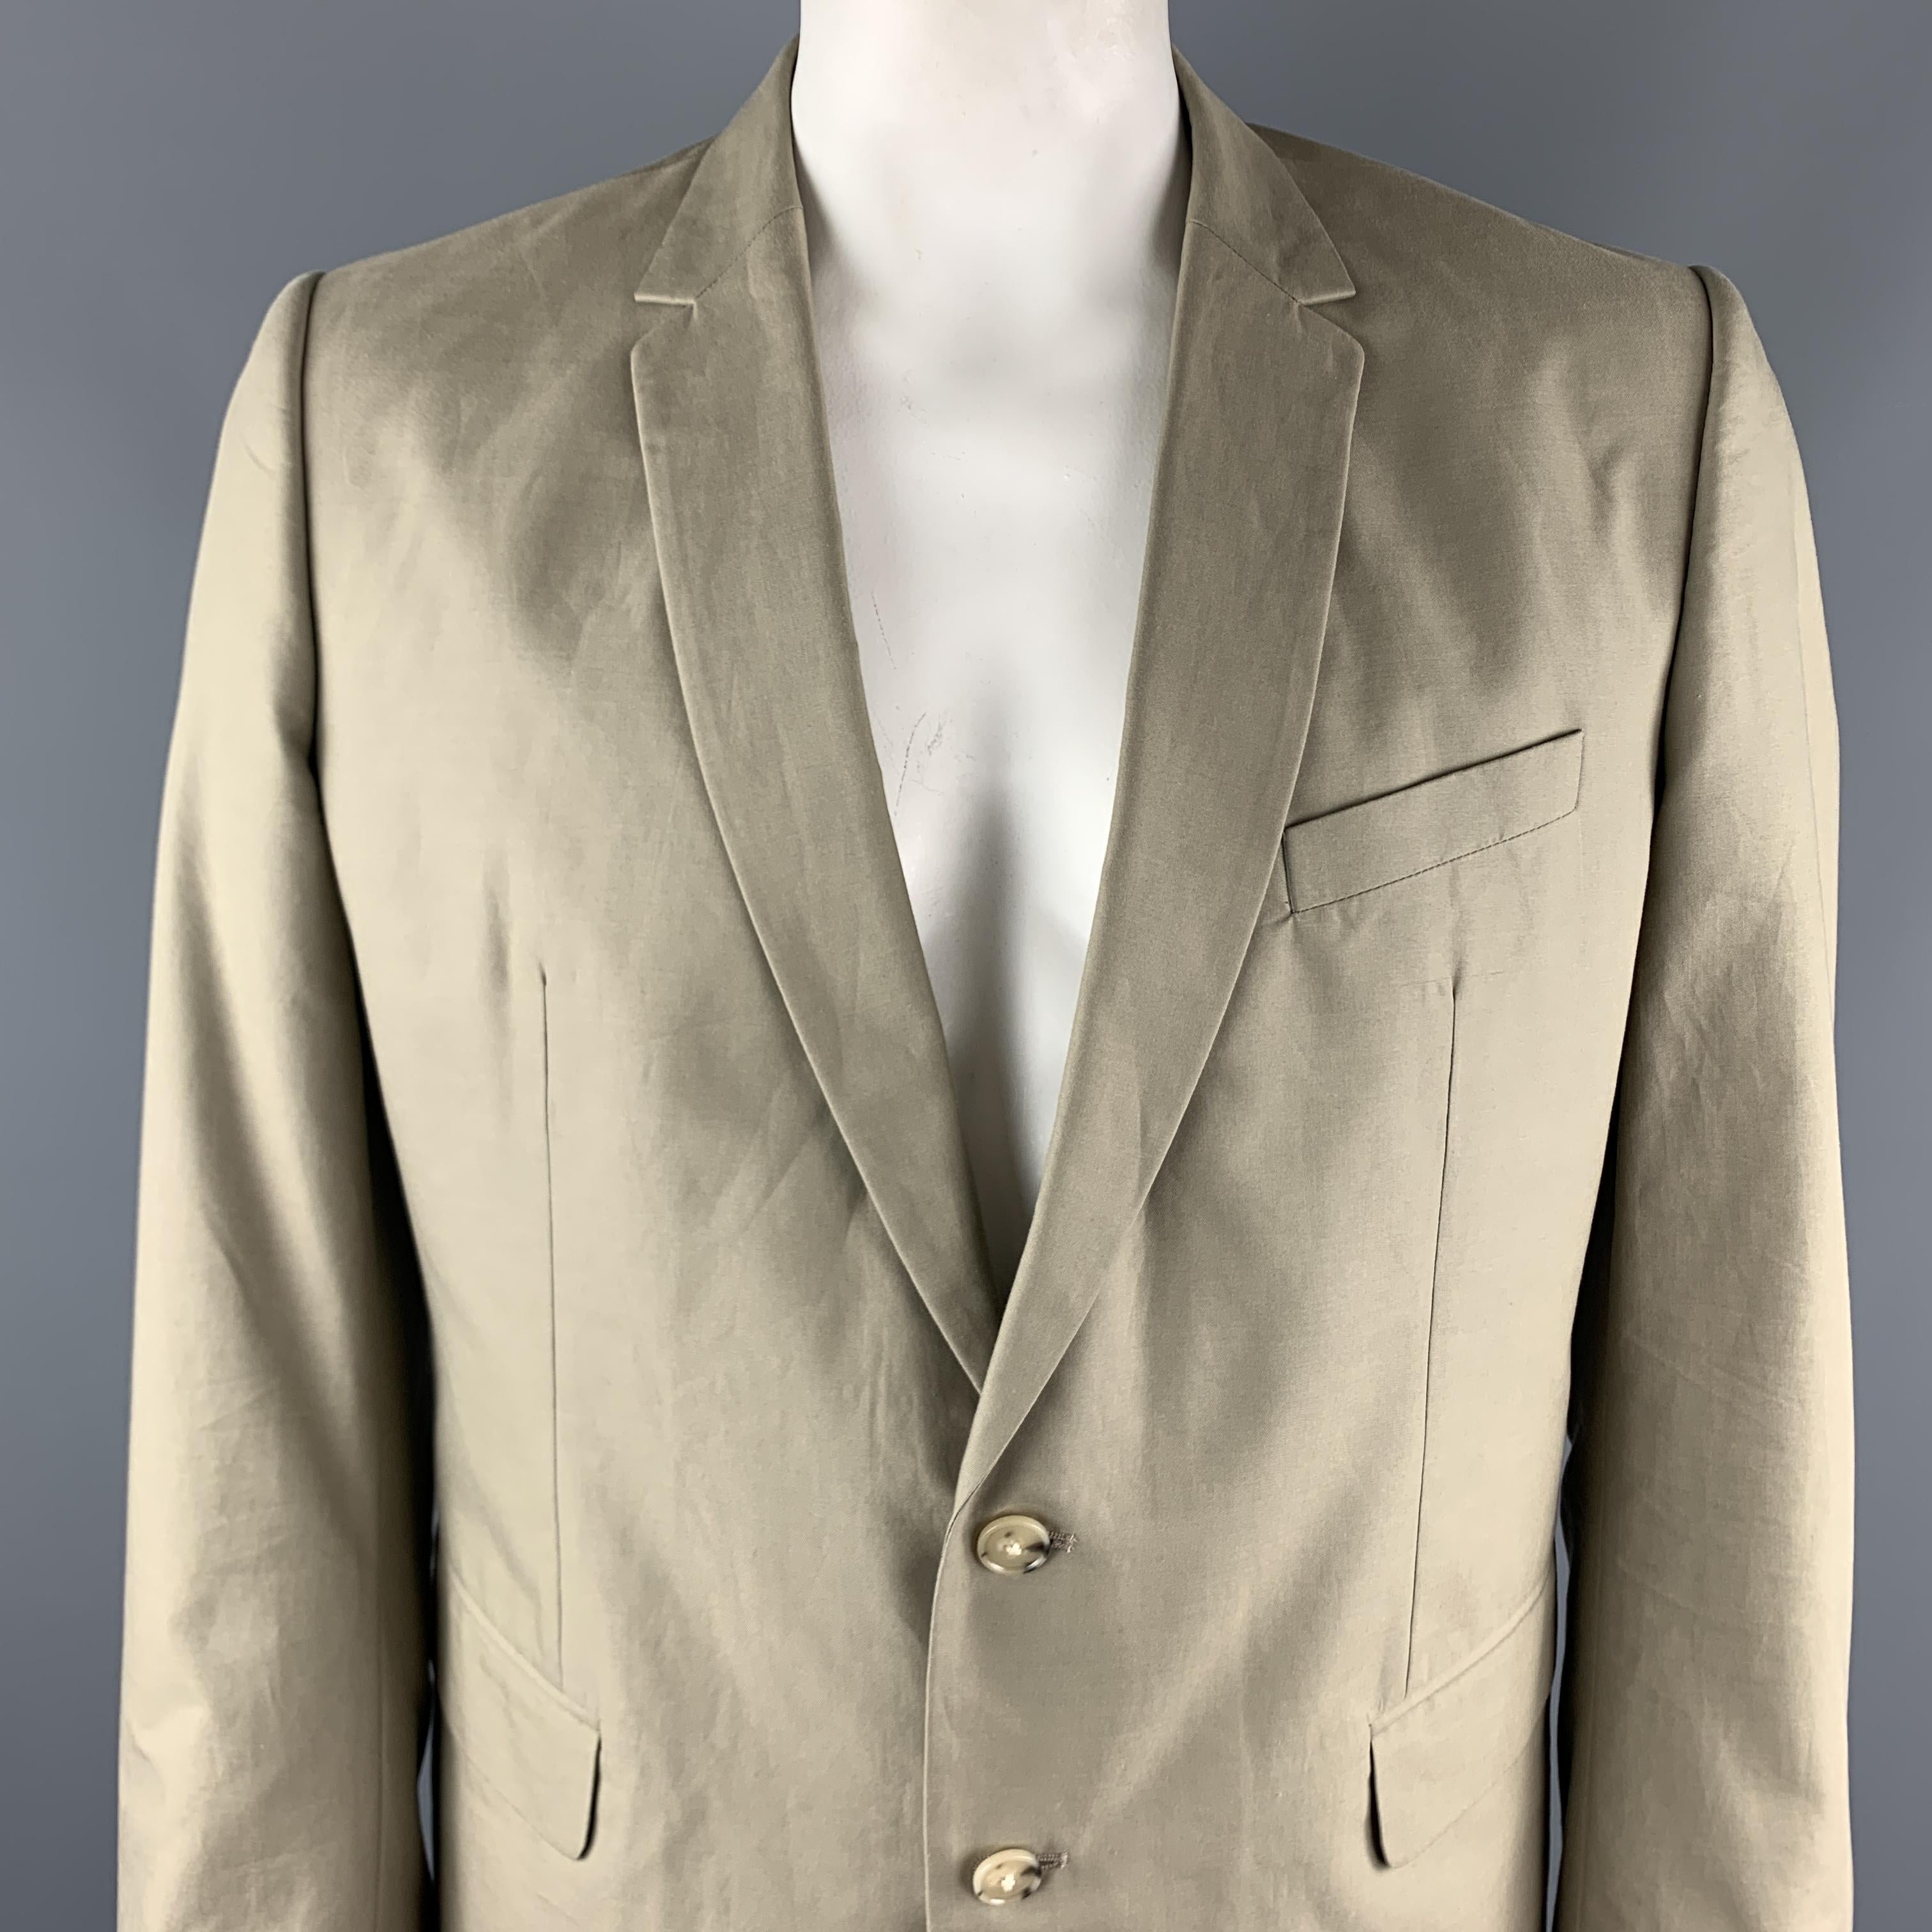 DRIES VAN NOTEN suit comes in a khaki cotton and includes a single breasted, two button sport coat with a notch lapel and matching  front trousers. 

Excellent Pre-Owned Condition.
Marked: 56

Measurements:

-Jacket
Shoulder: 16.5 in. 
Chest: 44 in.